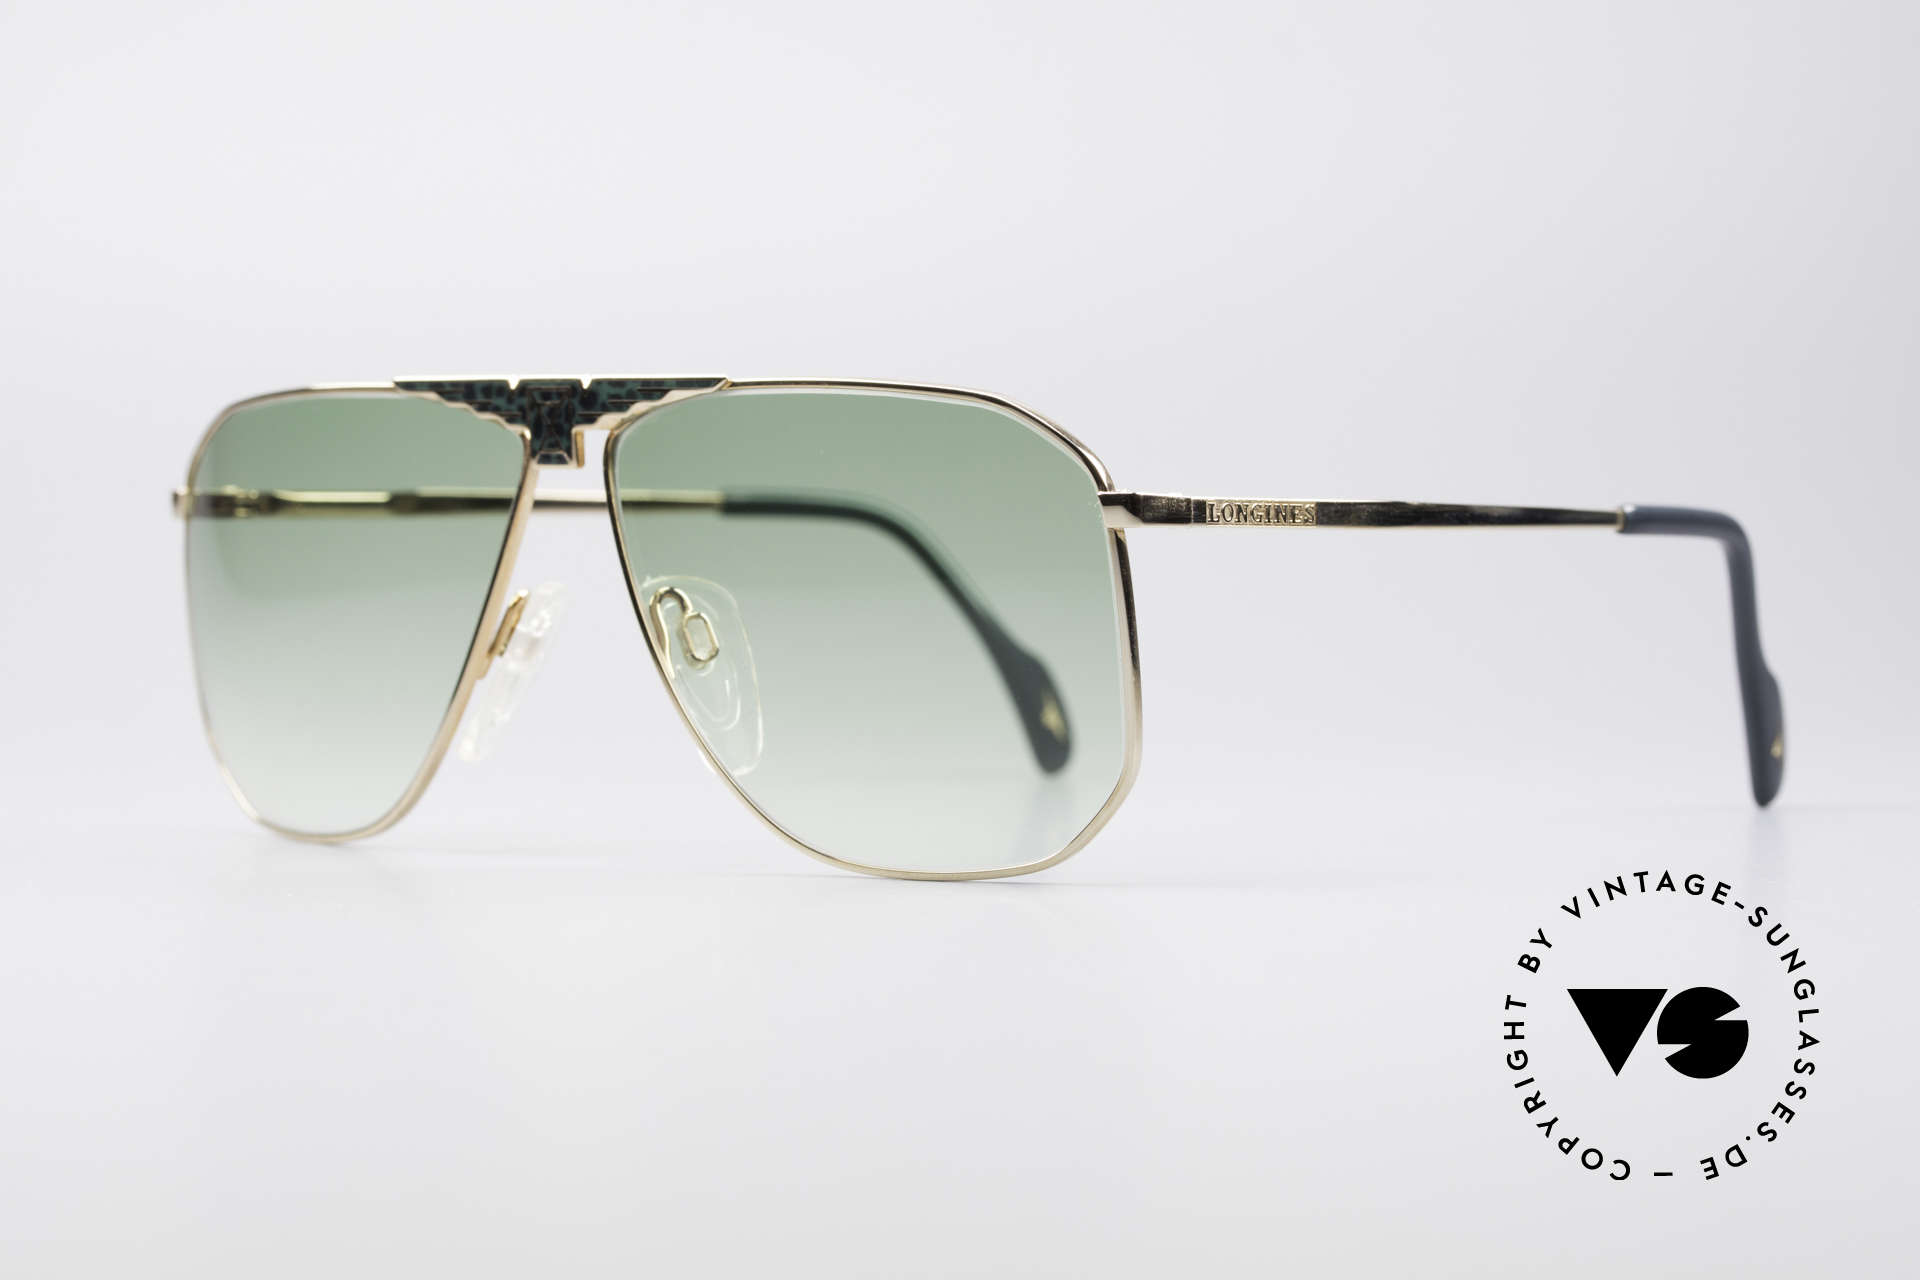 Longines 0155 80's Designer Sunglasses, made in cooperation with Metzler (made in Germany), Made for Men